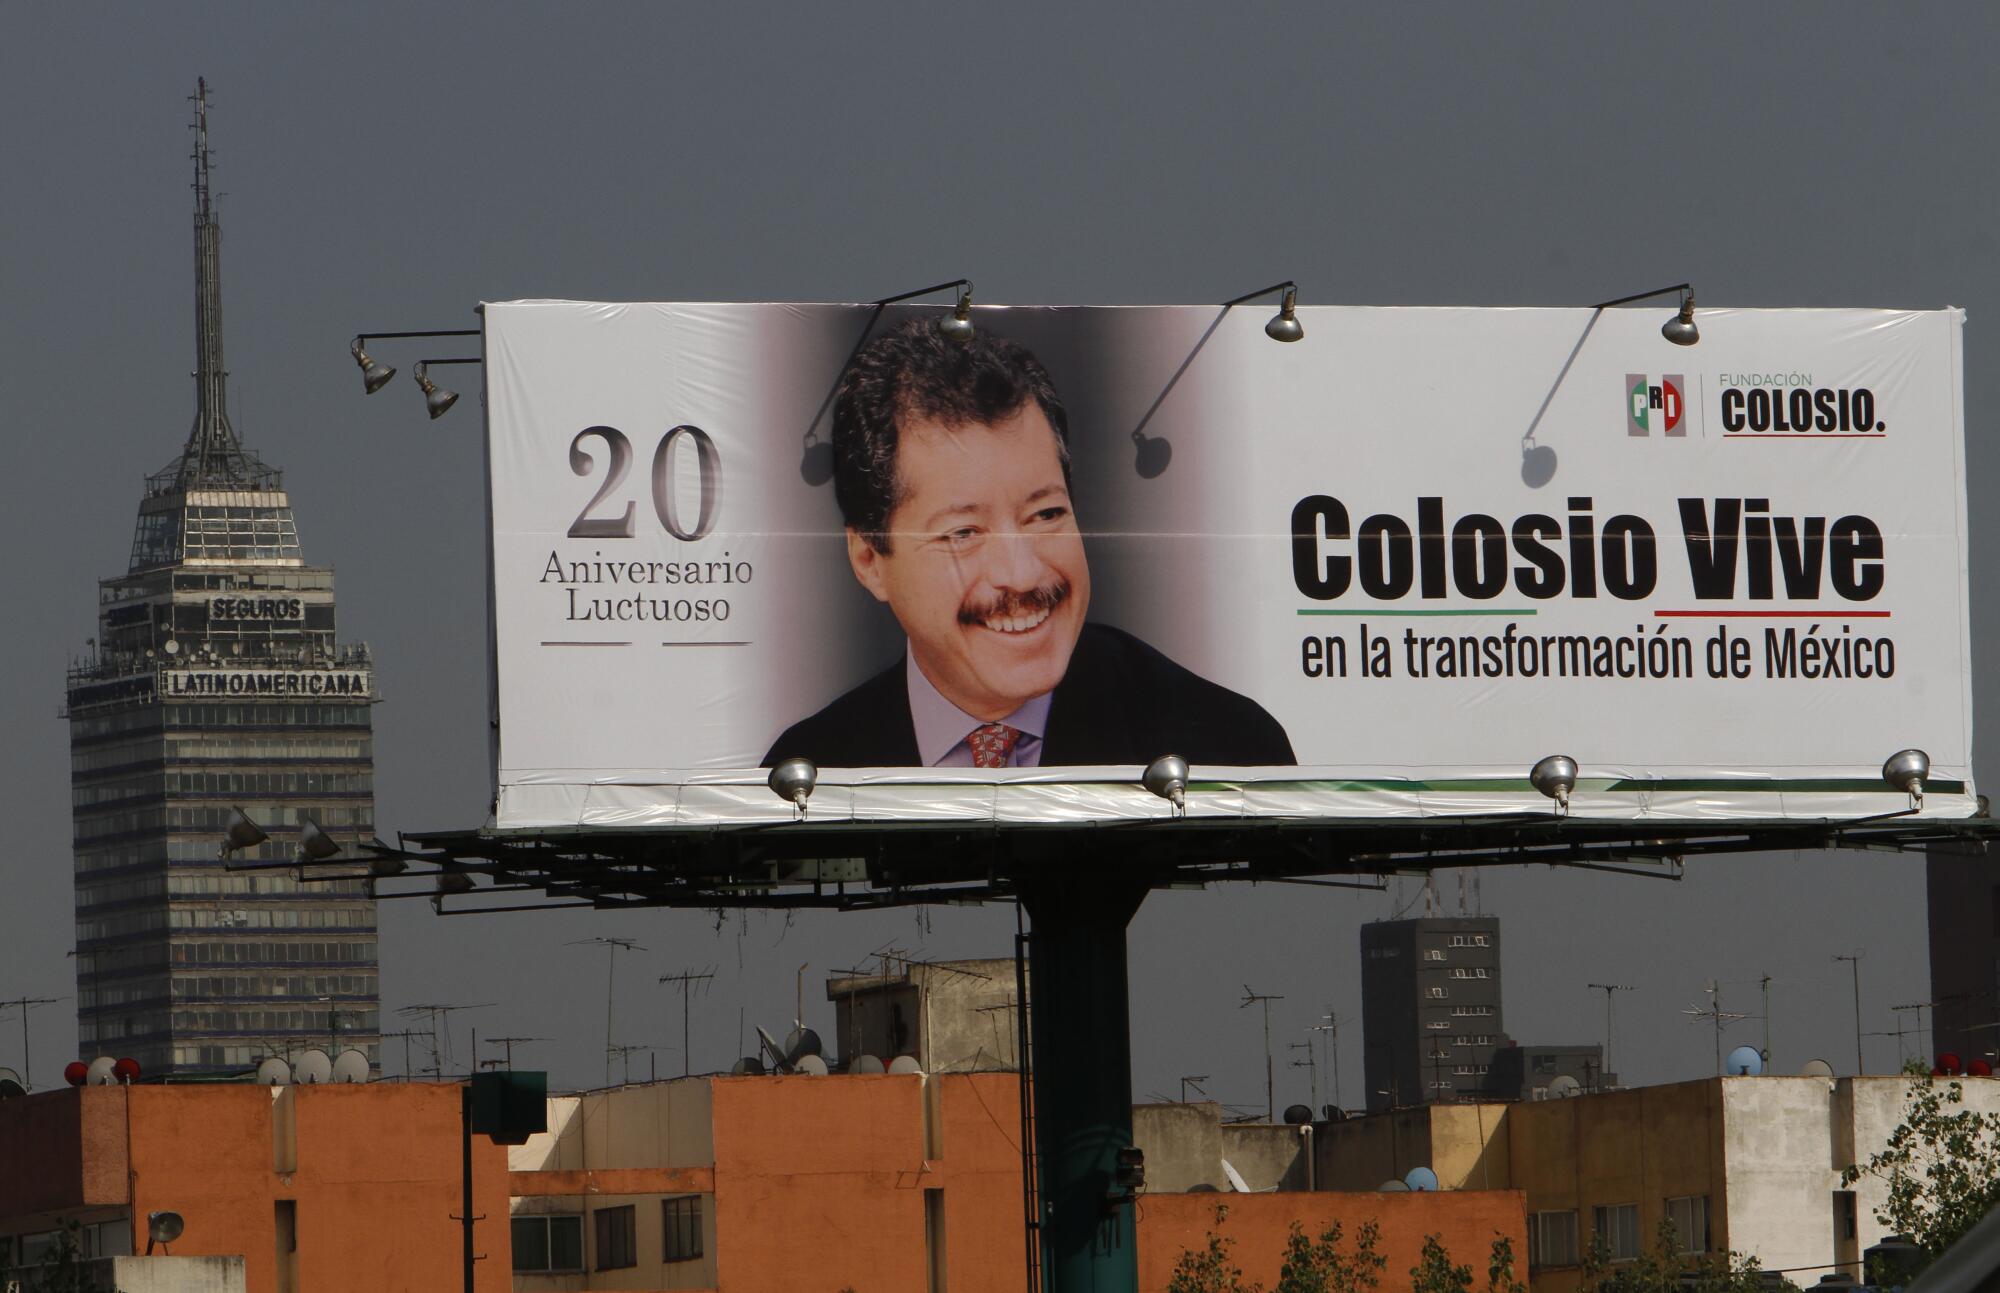 Billboard with image of the assassinated Mexican presidential candidate Luis Donaldo Colosio